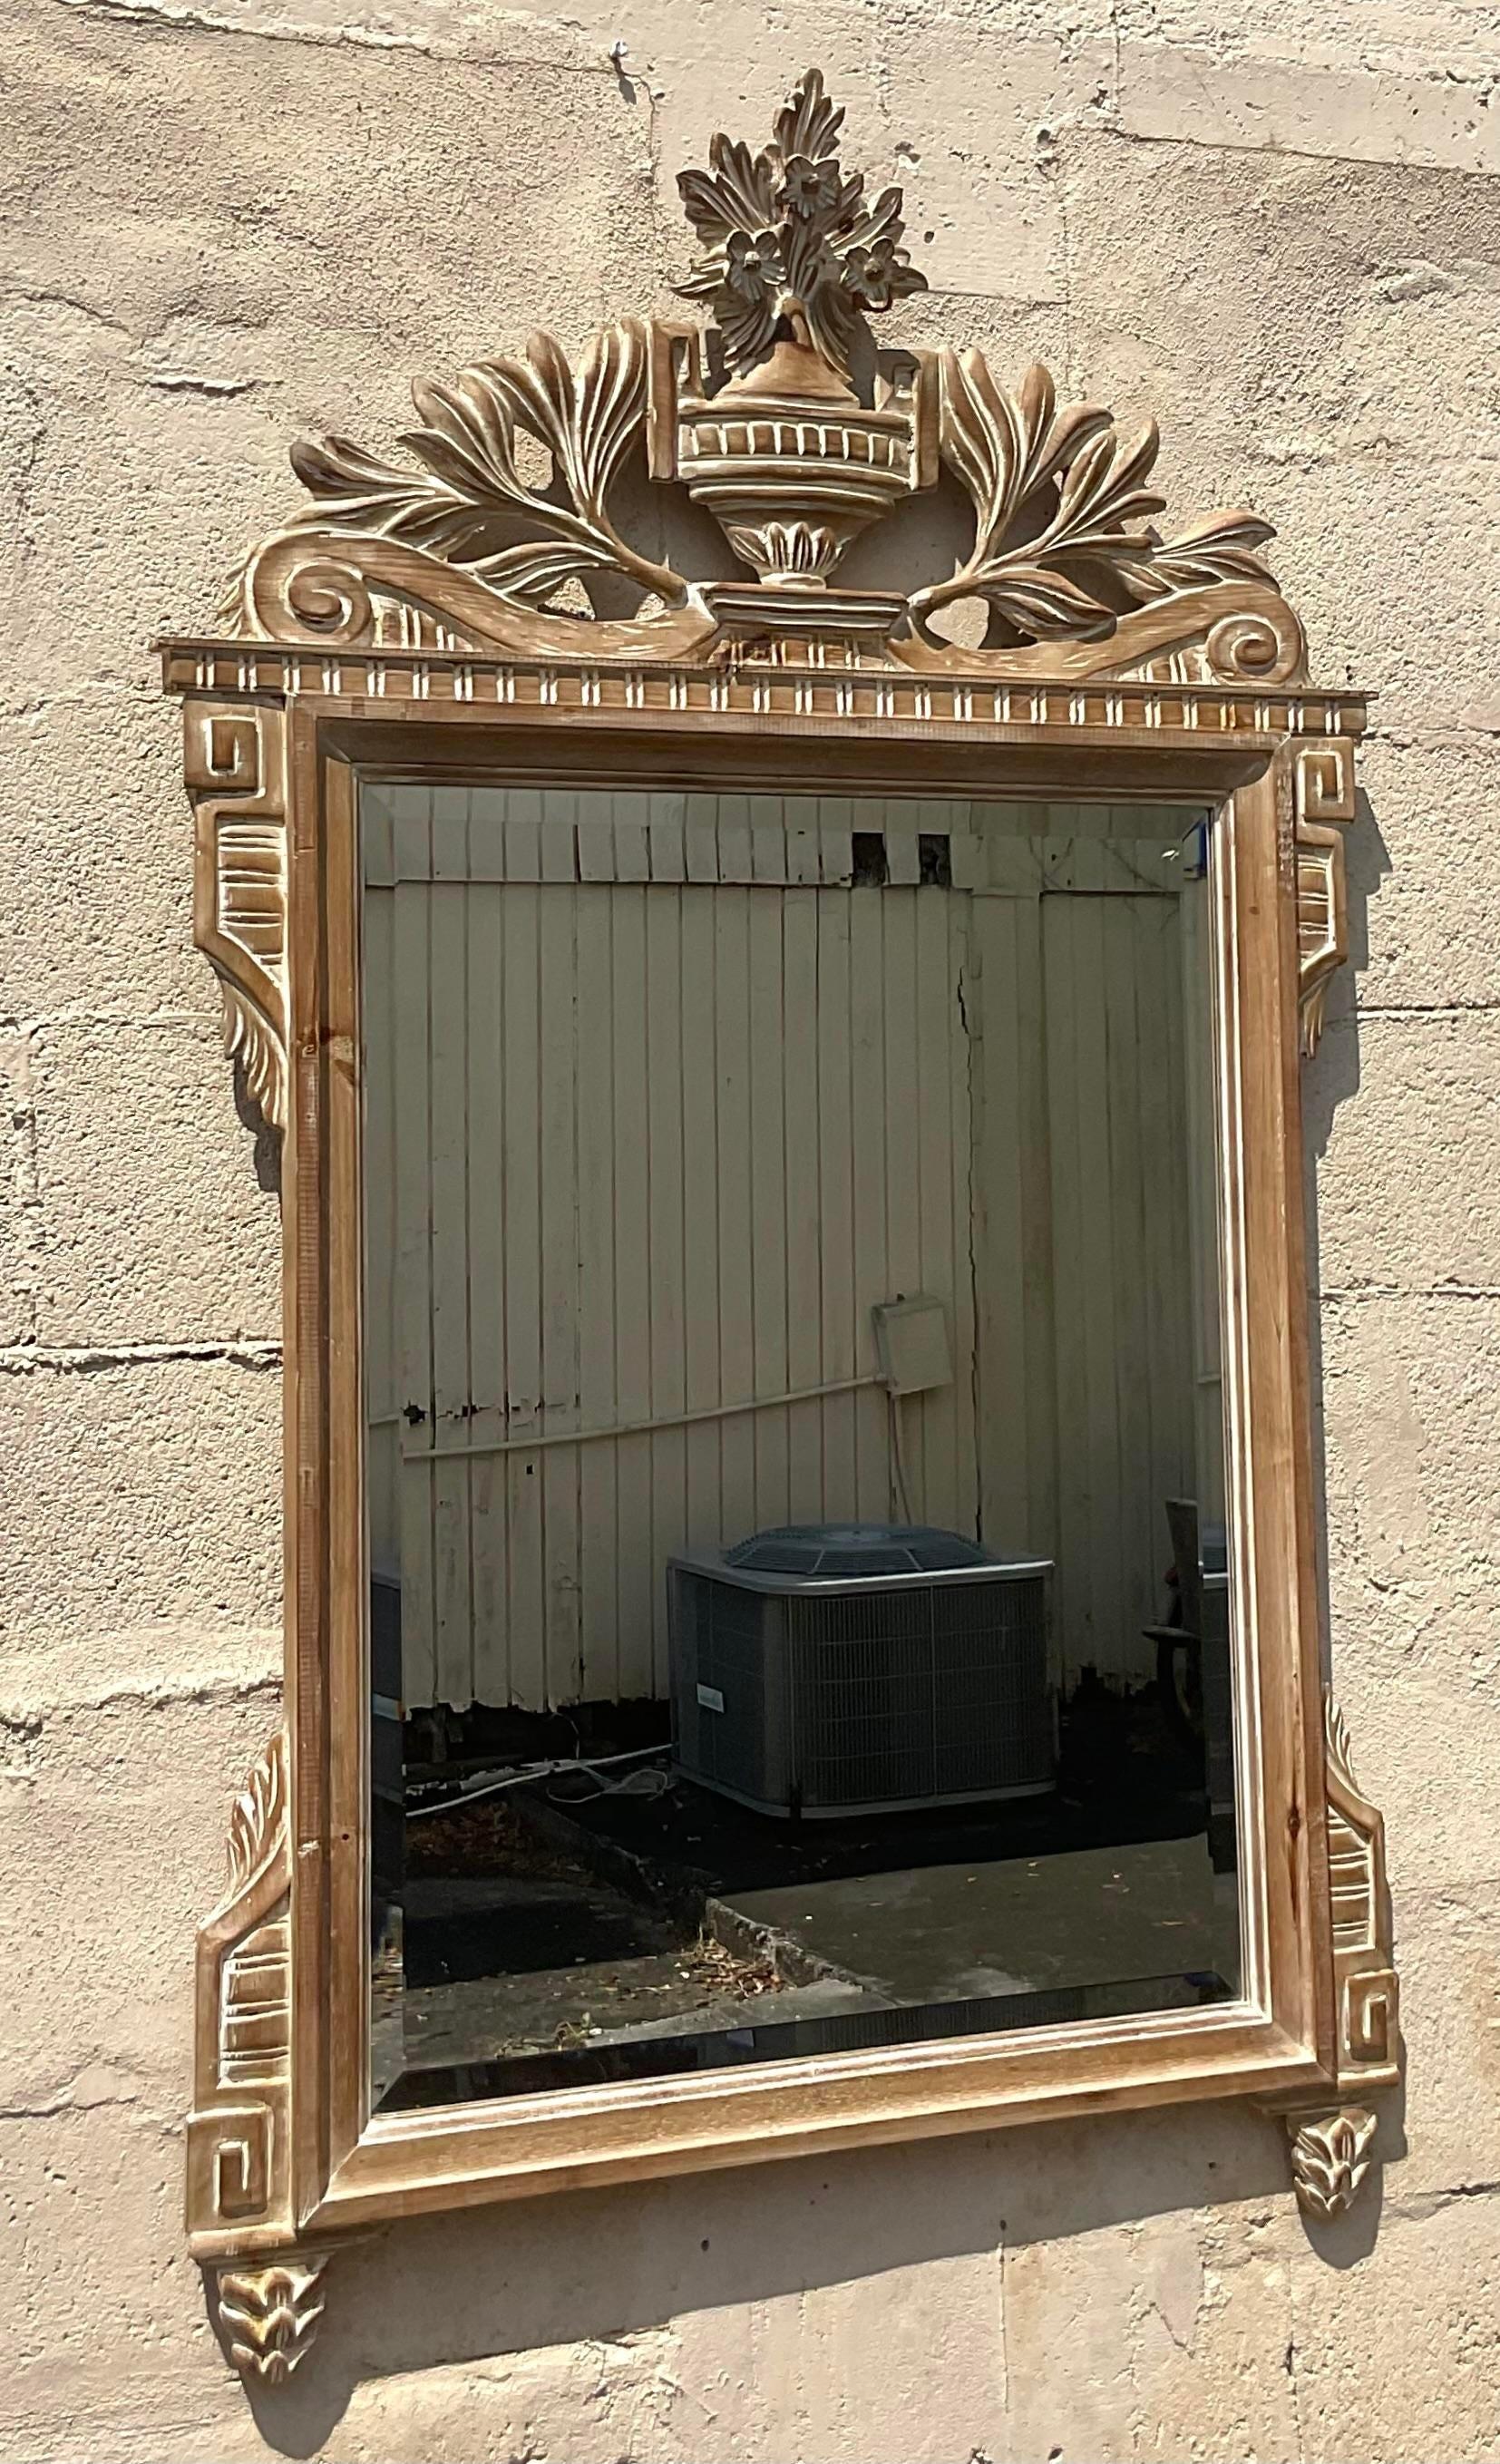 Elevate your decor with the timeless sophistication of this vintage Regency Italian carved wood mirror. Crafted with meticulous attention to detail, its ornate design and rich wood finish exude classic American style. Perfect for adding depth and